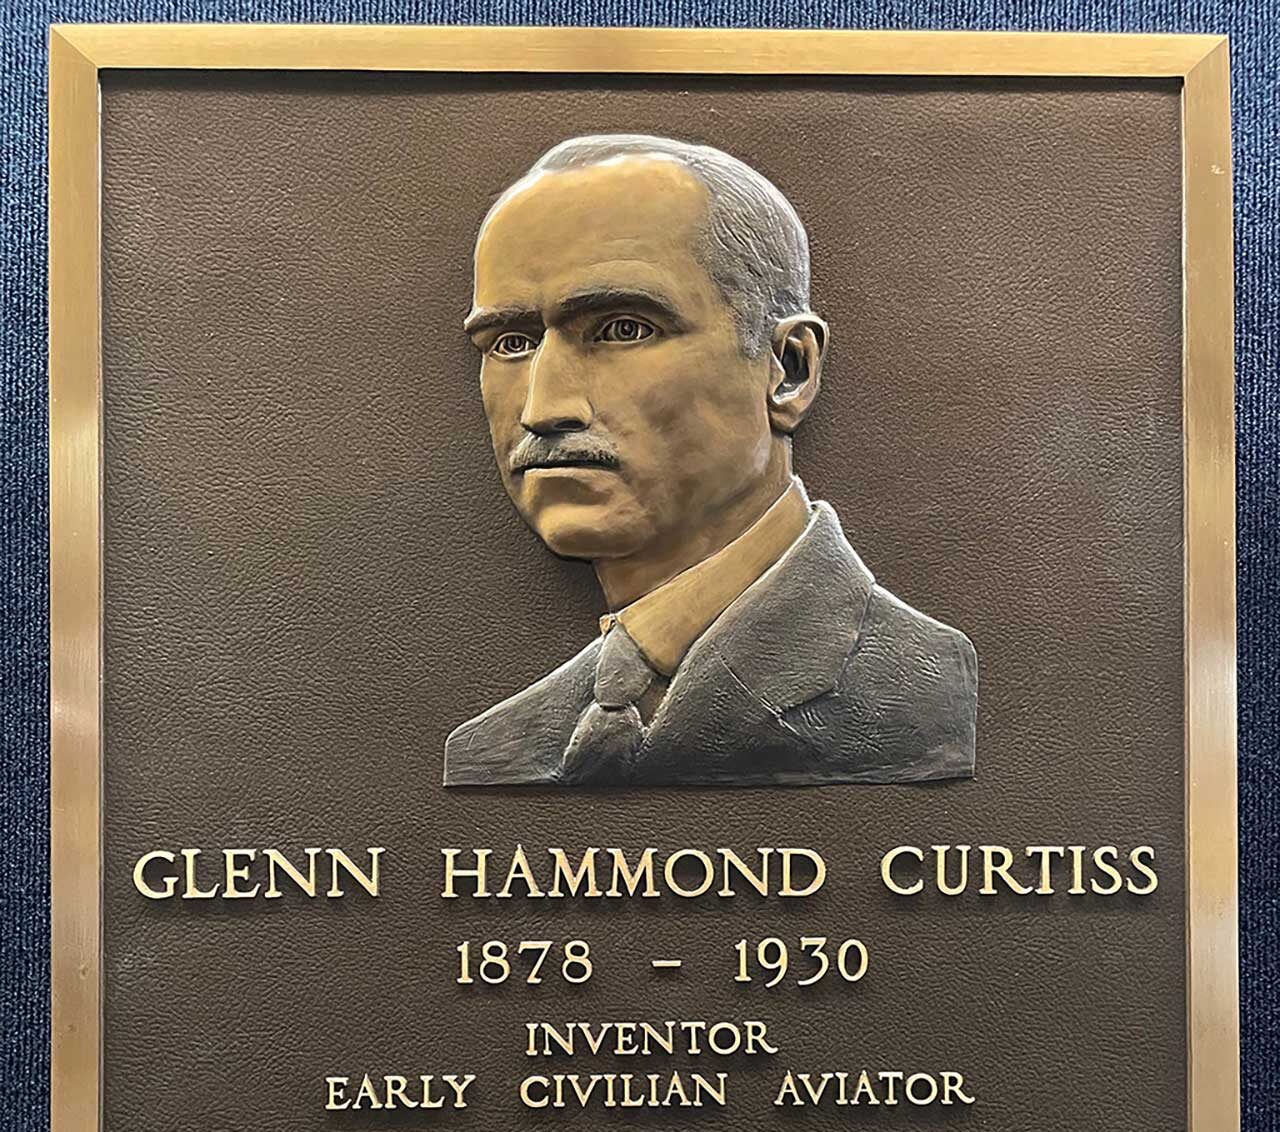 Plaque honoring Glenn Curtiss, the "Father of Naval Aviation" at the National Naval Aviation Museum in Pensacola, Florida